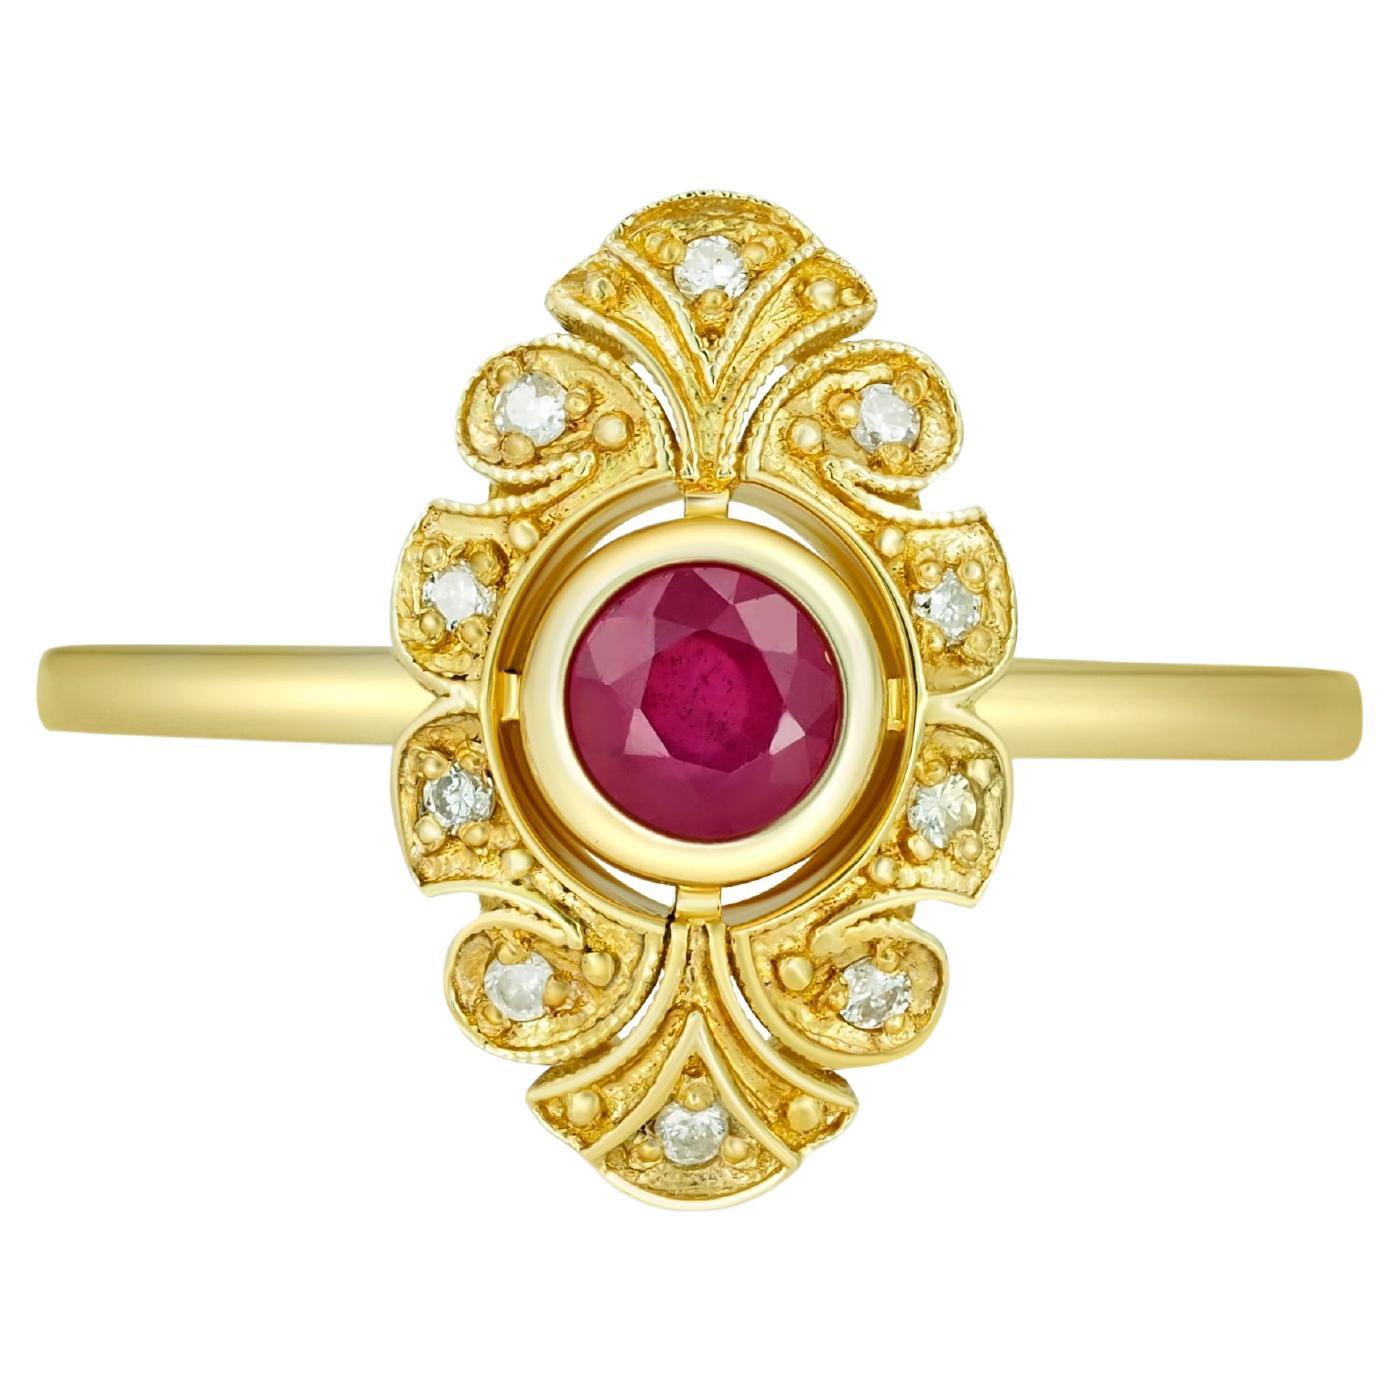 14 karat Gold Ring with Ruby and Diamonds, Vintage Inspired Ring. 